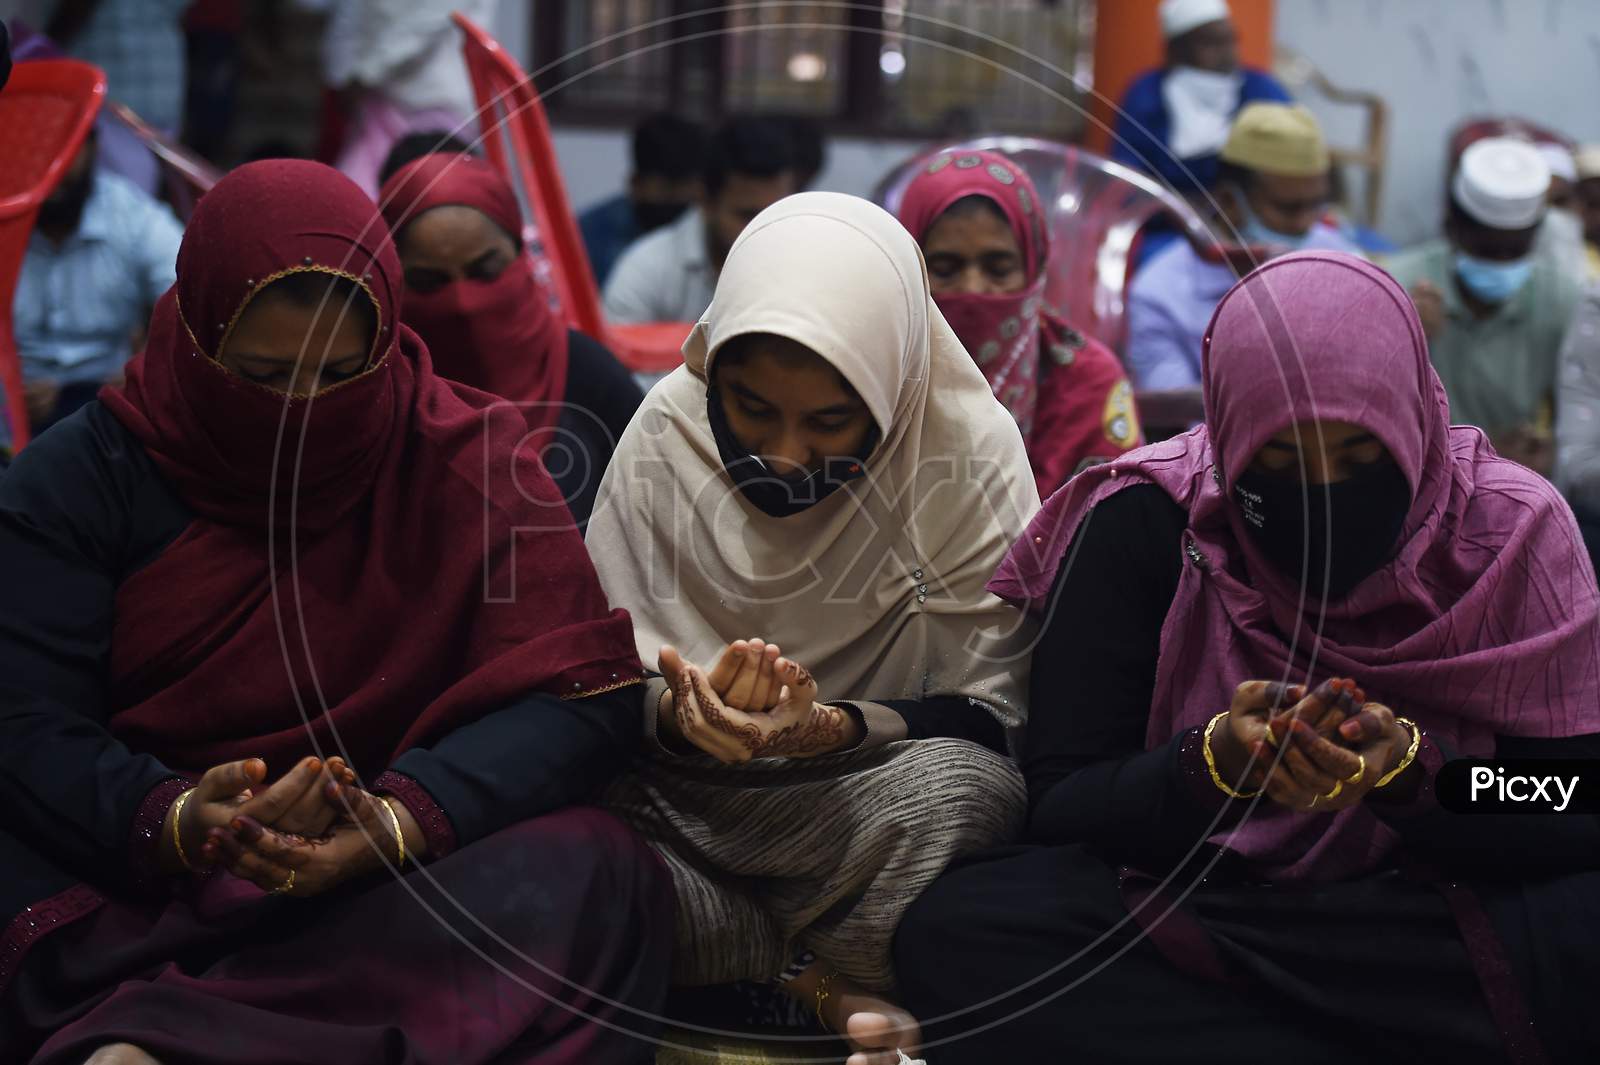 Members Of The Muslim Community Offer Namaz On The Occasion Of Eid Al-Adha,on July 31, 2020 In Chennai